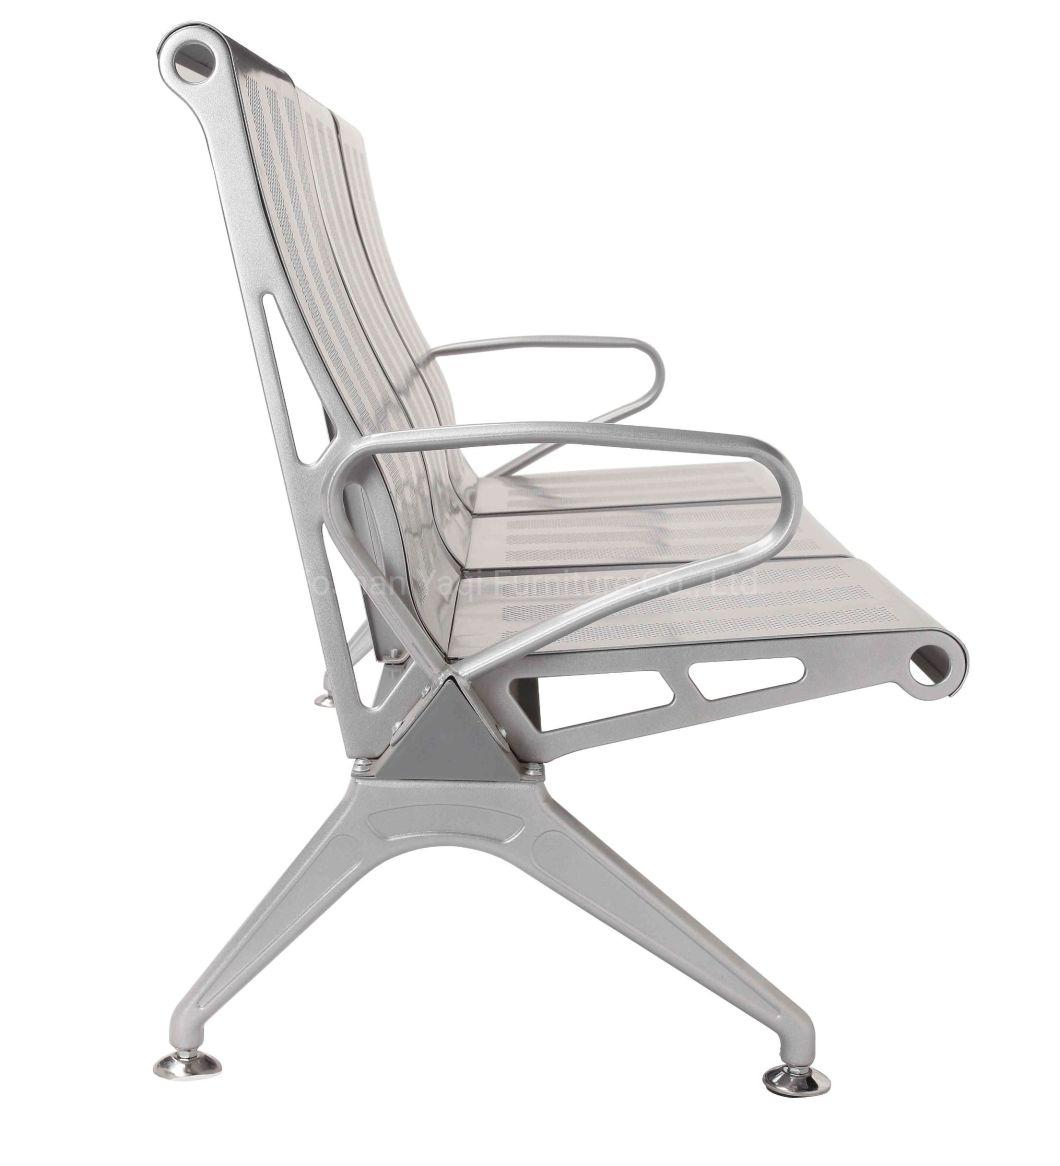 Commercial Hospital Waiting Room Airport Waiting Chair (YA-J108)